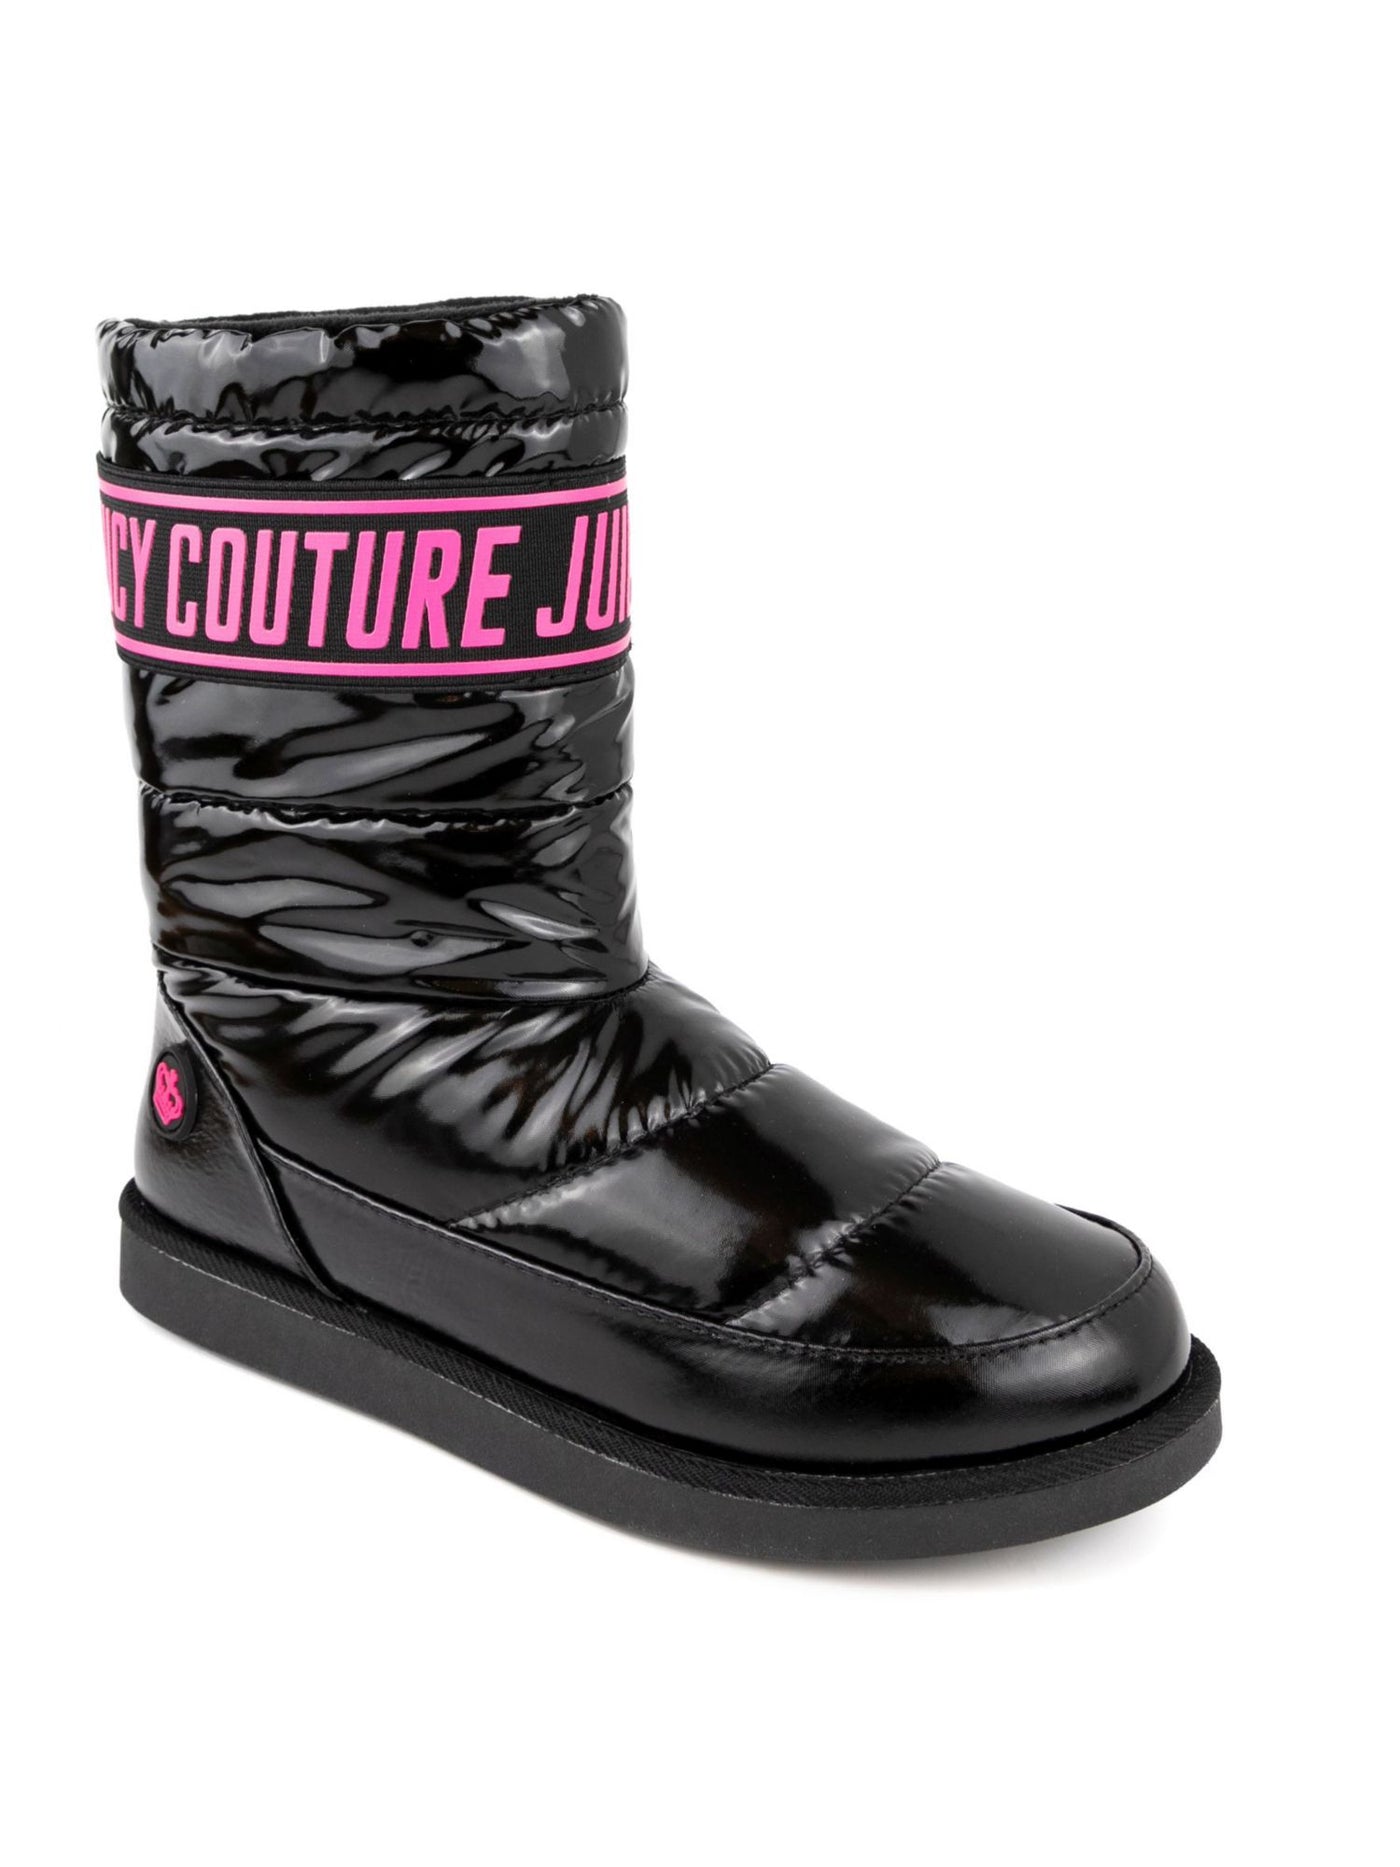 JUICY COUTURE Womens Black Logo Cushioned Kissie Round Toe Winter 8